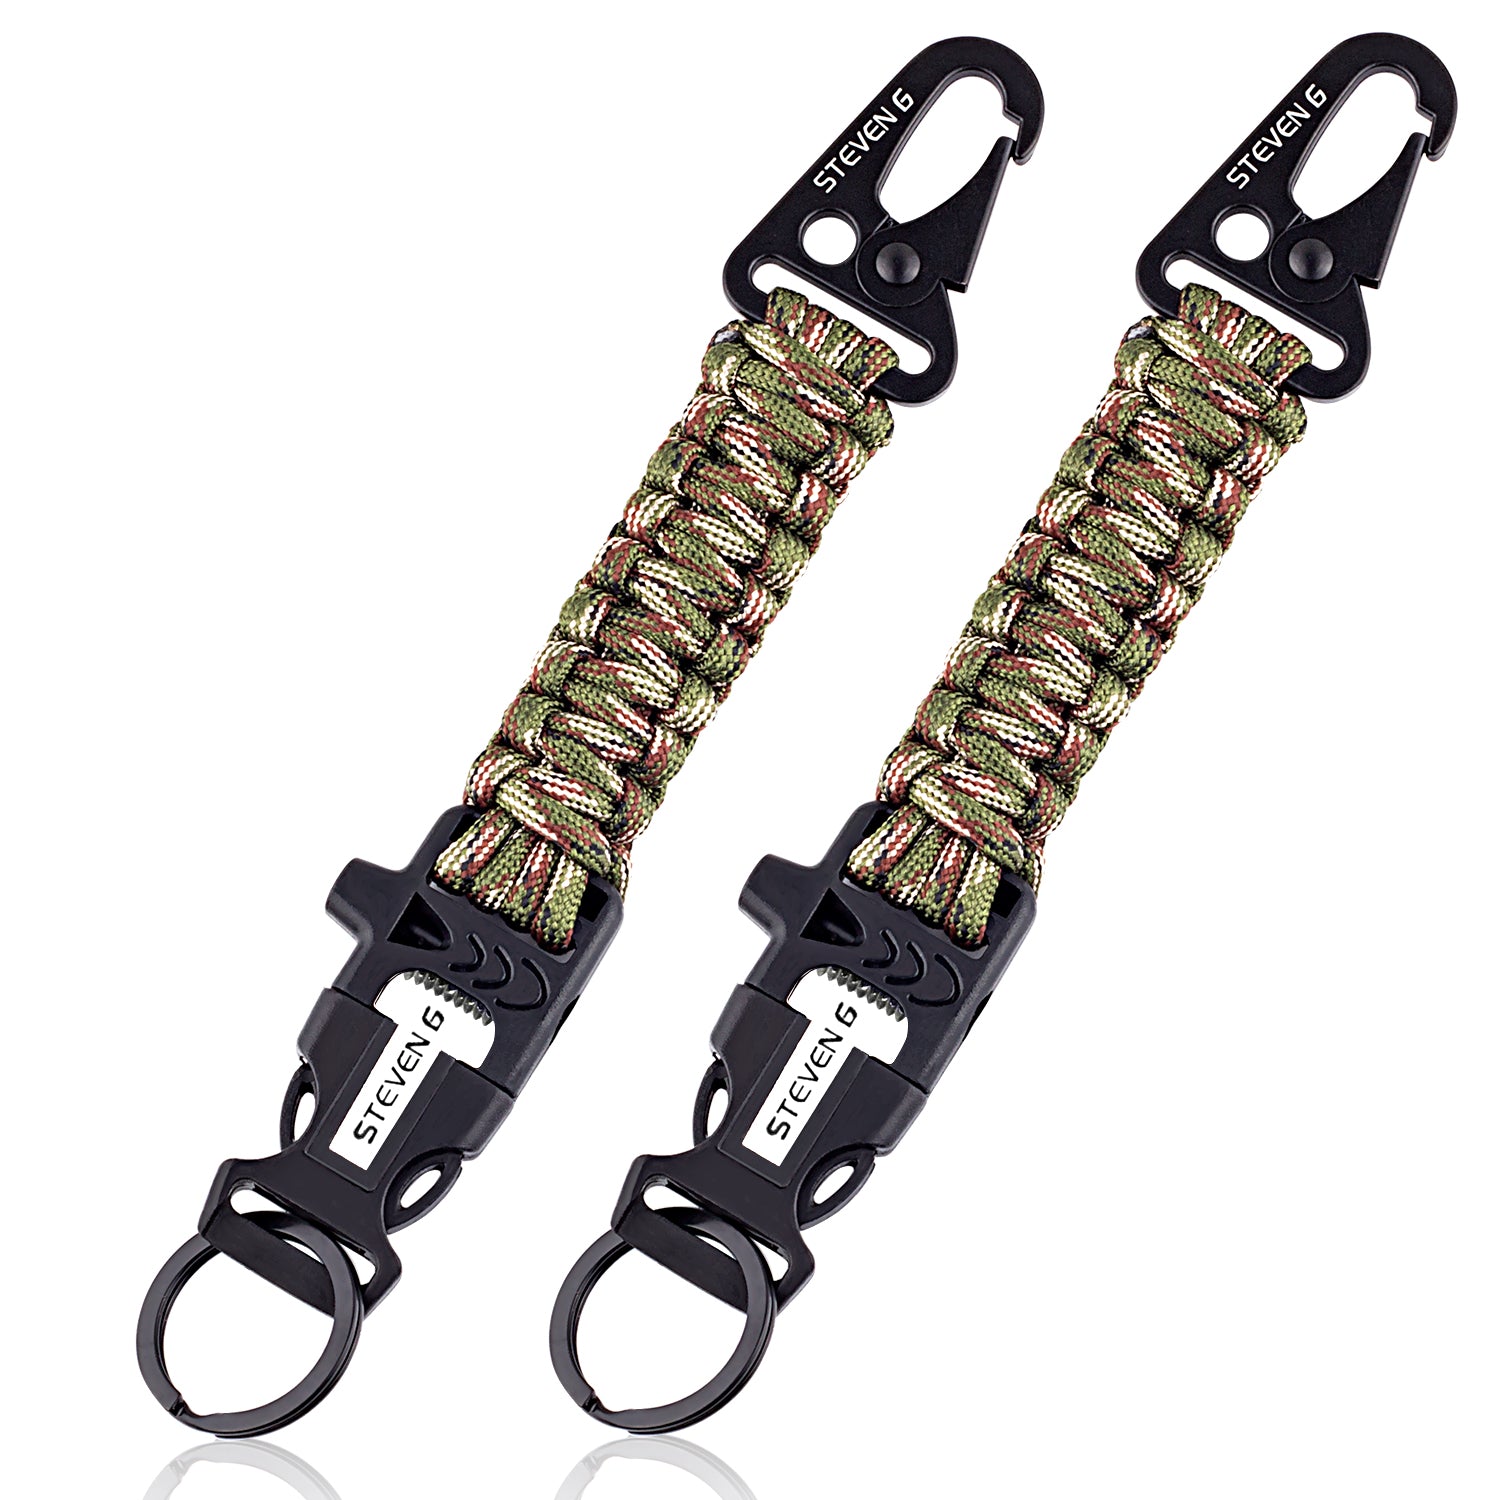 paracord survival keychain